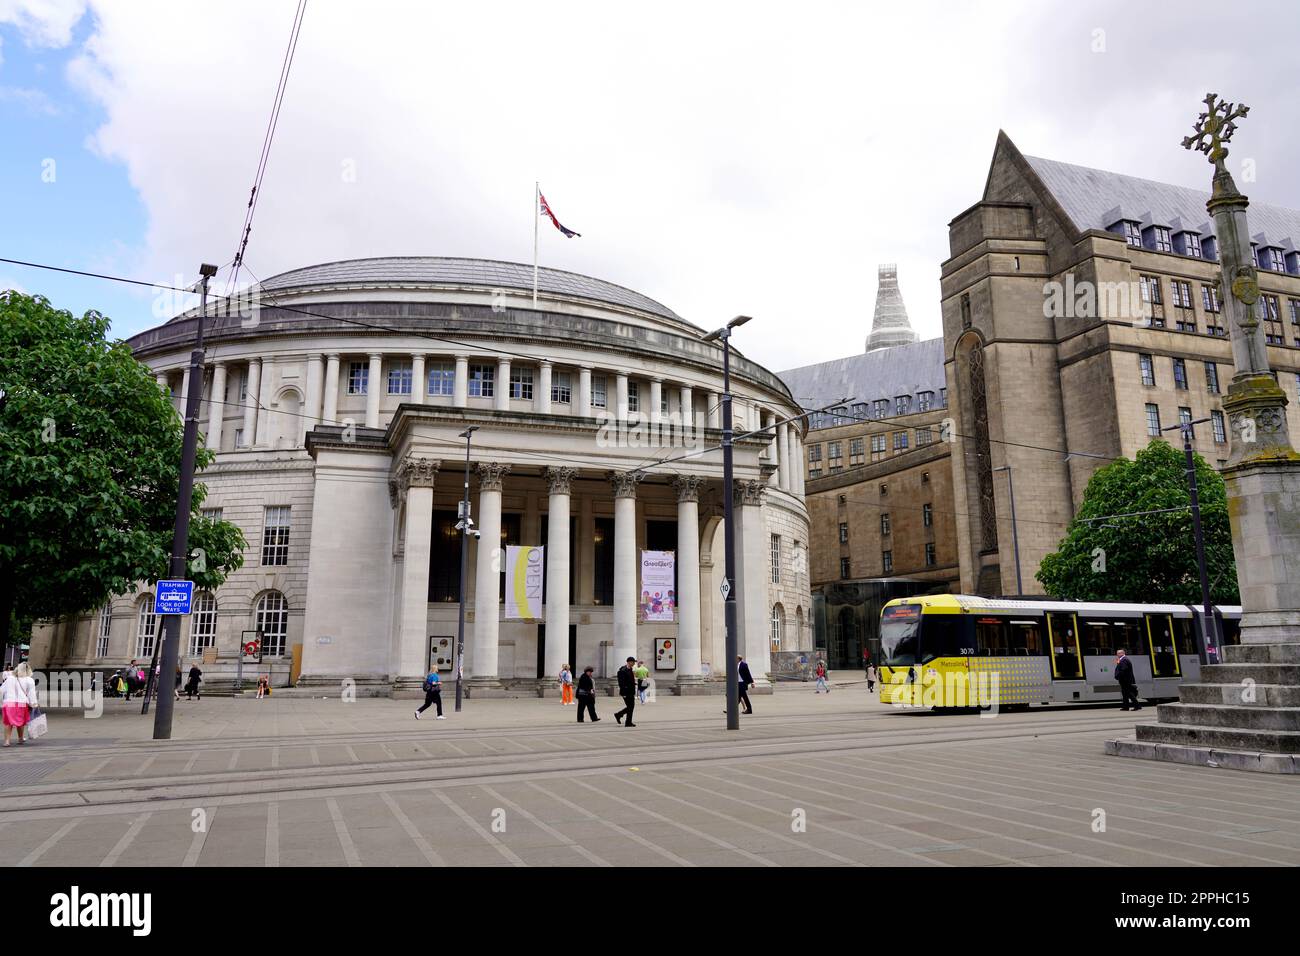 MANCHESTER, UK - JULY 13, 2022: Saint Peter square with Manchester Central Library and Manchester Town Hall Extension in Manchester city center, England, UK Stock Photo